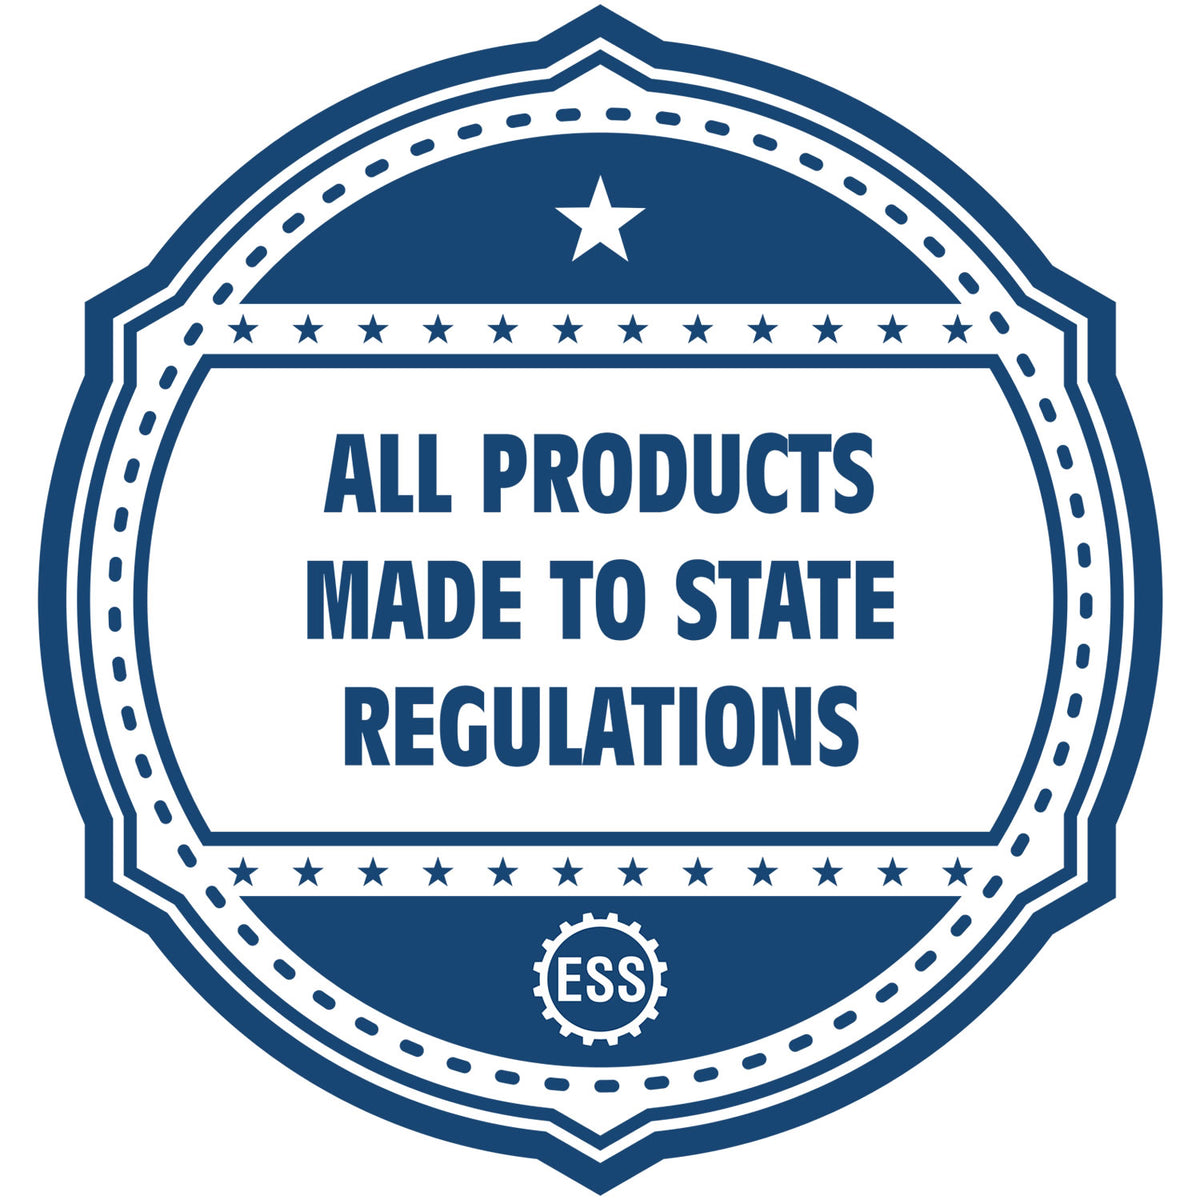 An icon or badge element for the Slim Pre-Inked Tennessee Landscape Architect Seal Stamp showing that this product is made in compliance with state regulations.